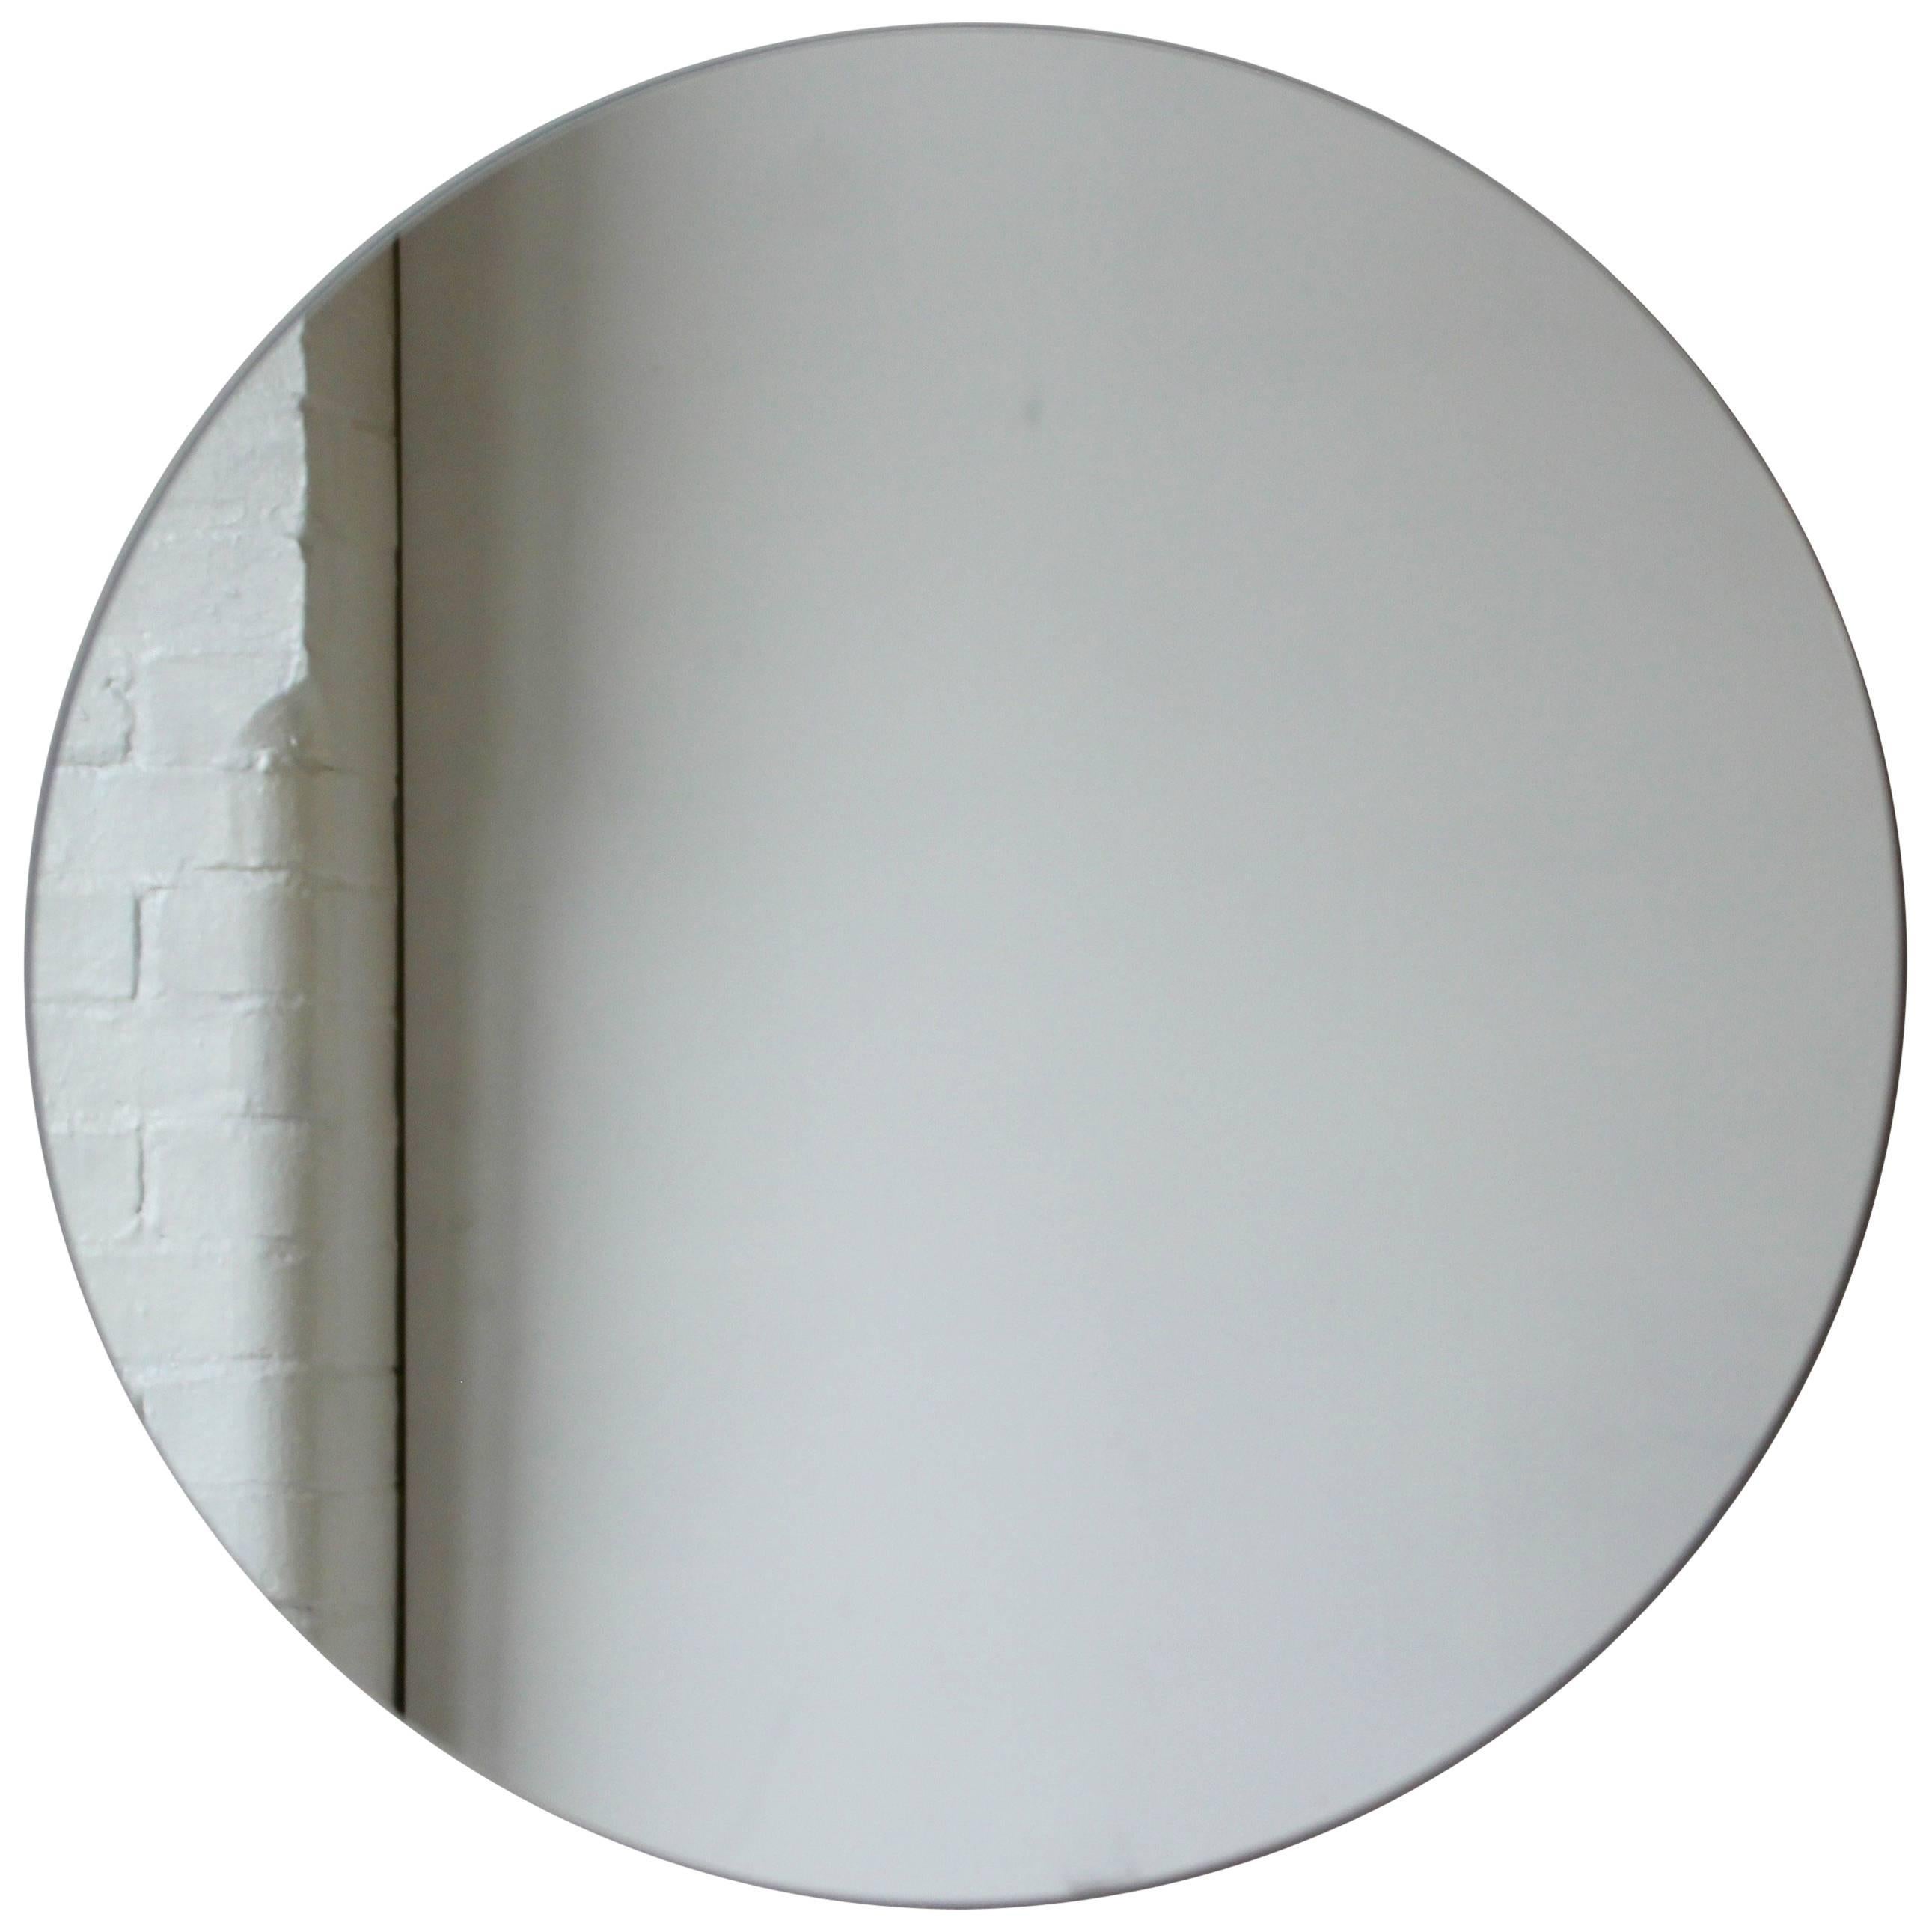 Charming and minimalist round frameless mirror with a floating effect. Quality design that ensures the mirror sits perfectly parallel to the wall. Designed and made in London, UK.

Fitted with professional plates not visible once installed for an